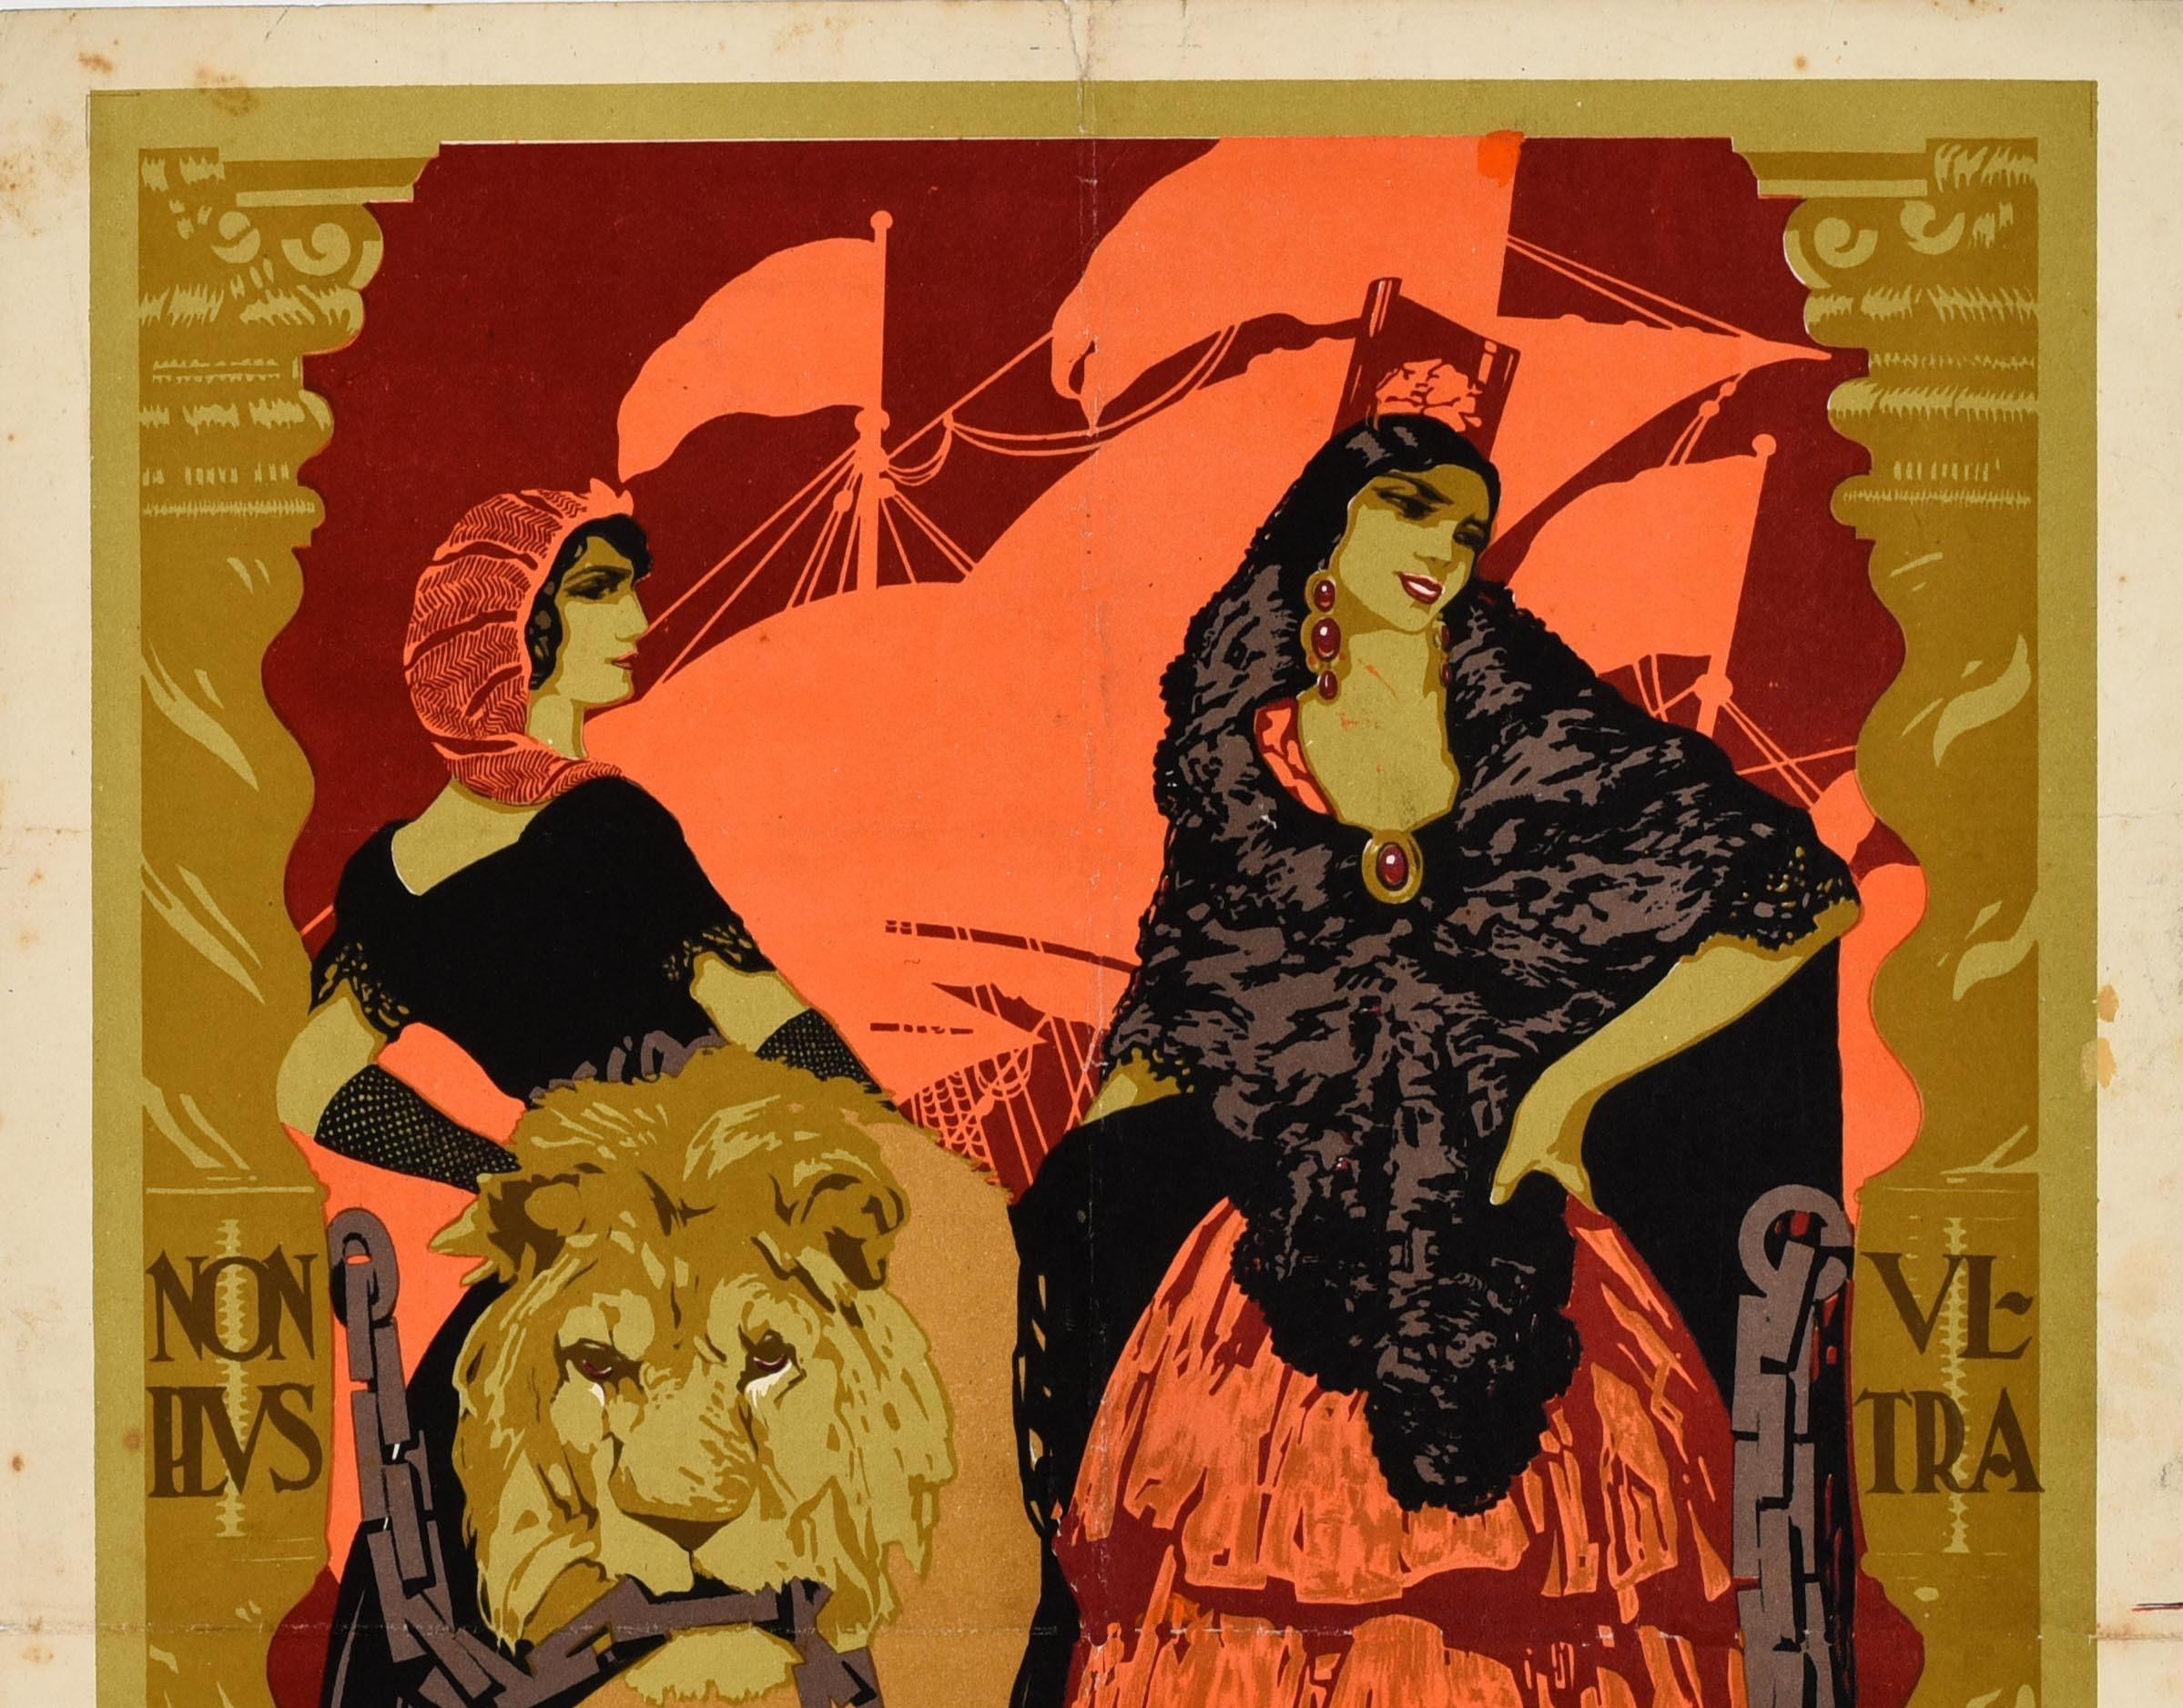 Original vintage advertising poster for the Spanish General Exhibition / Exposicion General Espanola held in Sevilla 1928 and Barcelona 1929 featuring a great design depicting a smiling lady wearing a traditional dress, shawl and headdress next to a